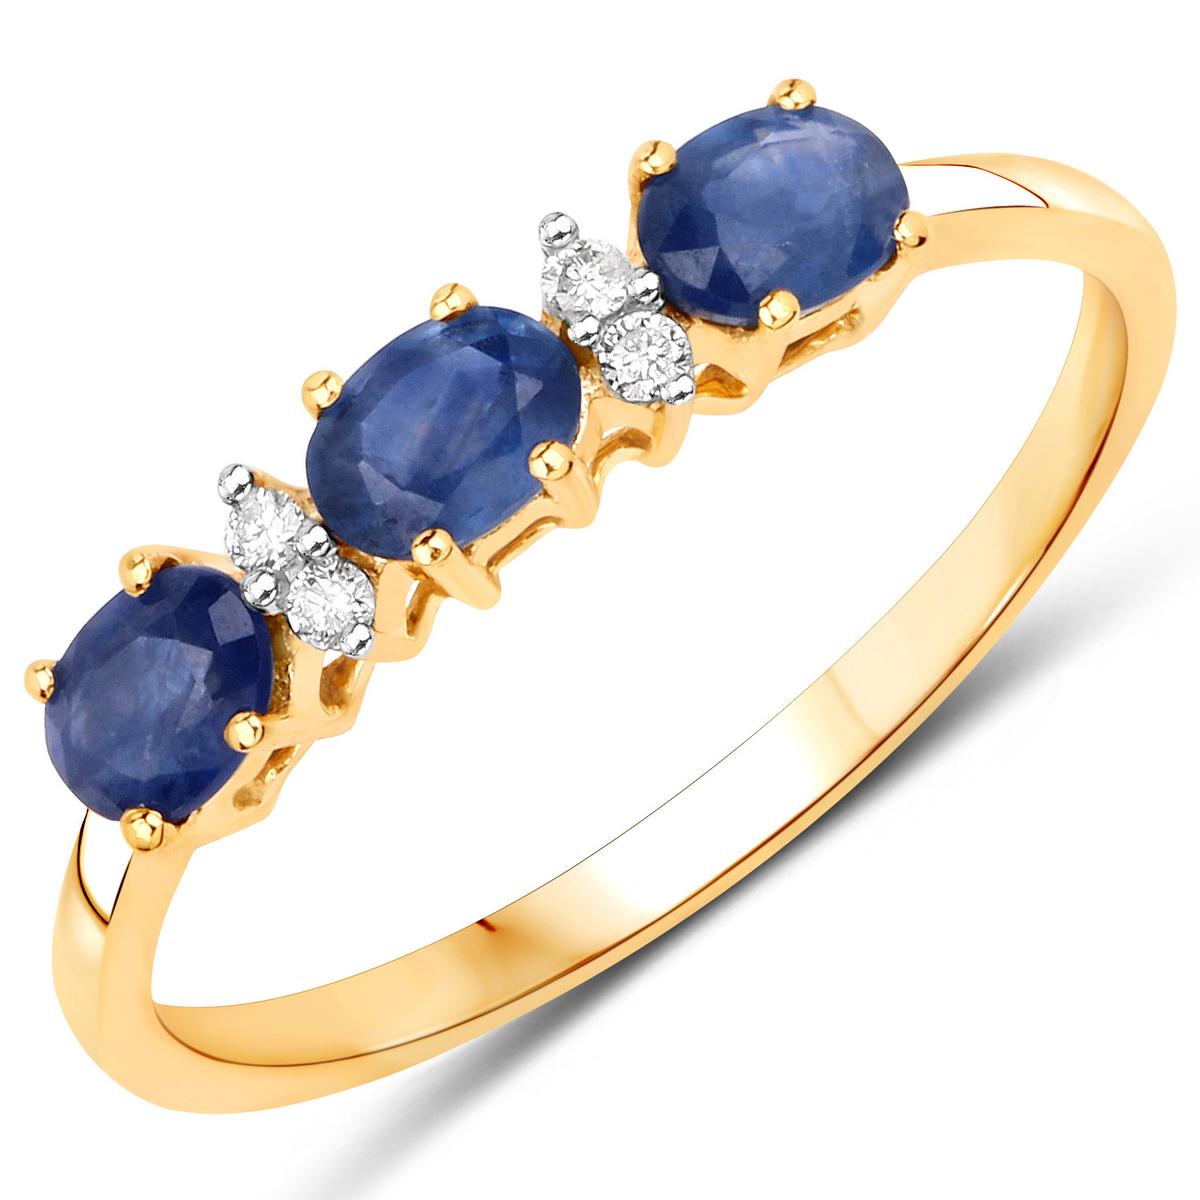 10KT Yellow Gold 0.70ctw Blue Sapphire and White Diamond Ring